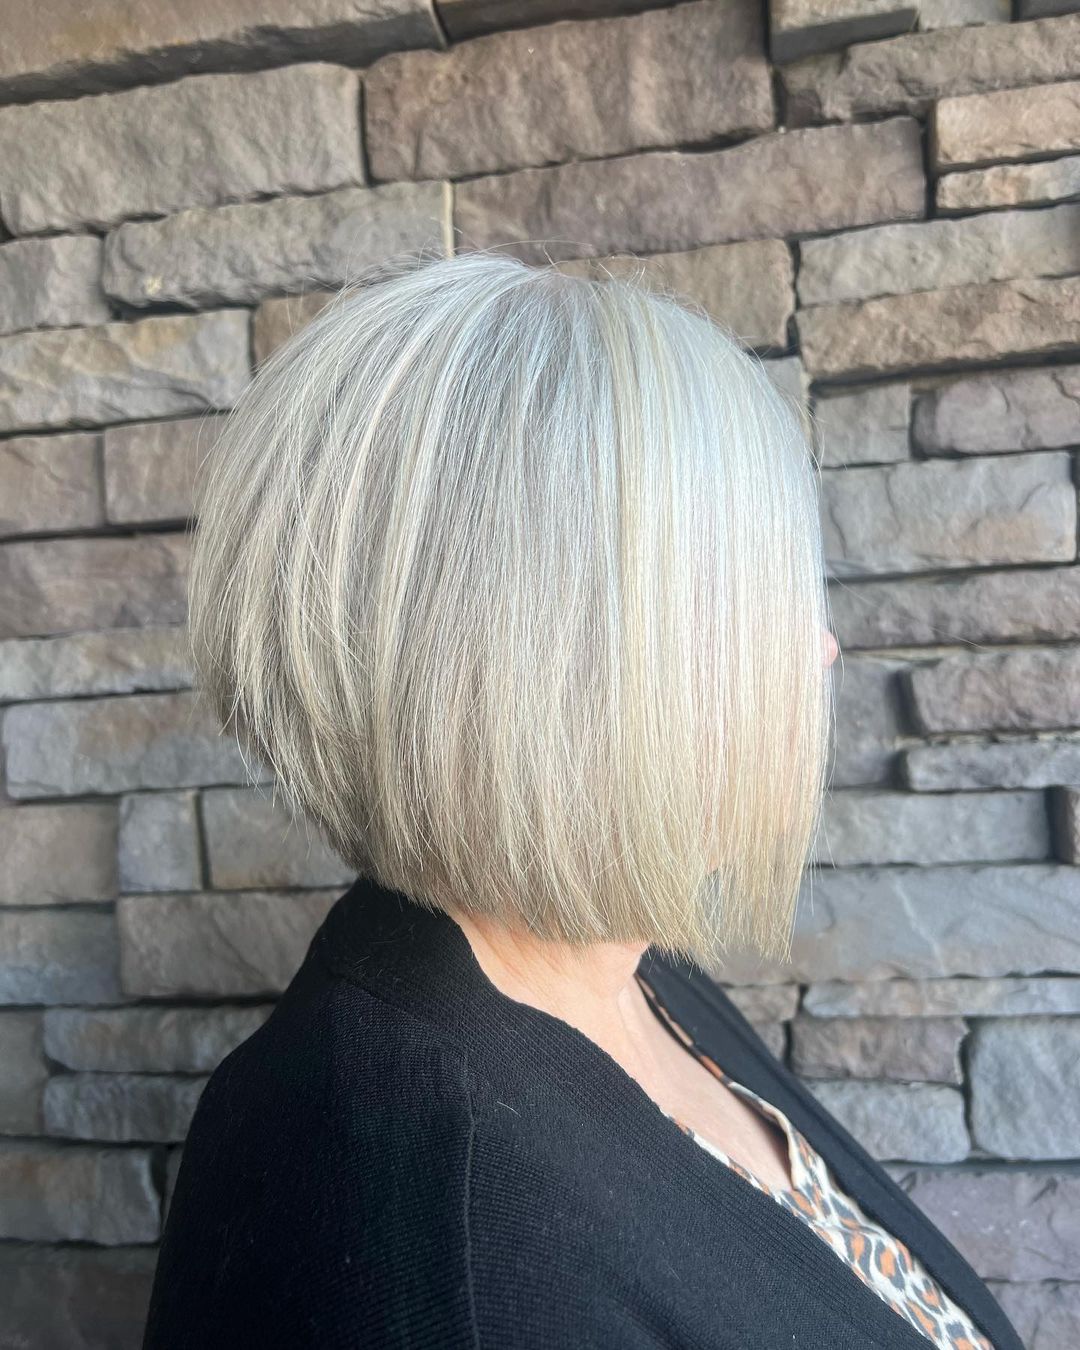 Stacked Bob 2 Long stacked bob | Medium length stacked bob | Pictures of stacked bob haircuts front and back Stacked Bob Hairstyles for Women